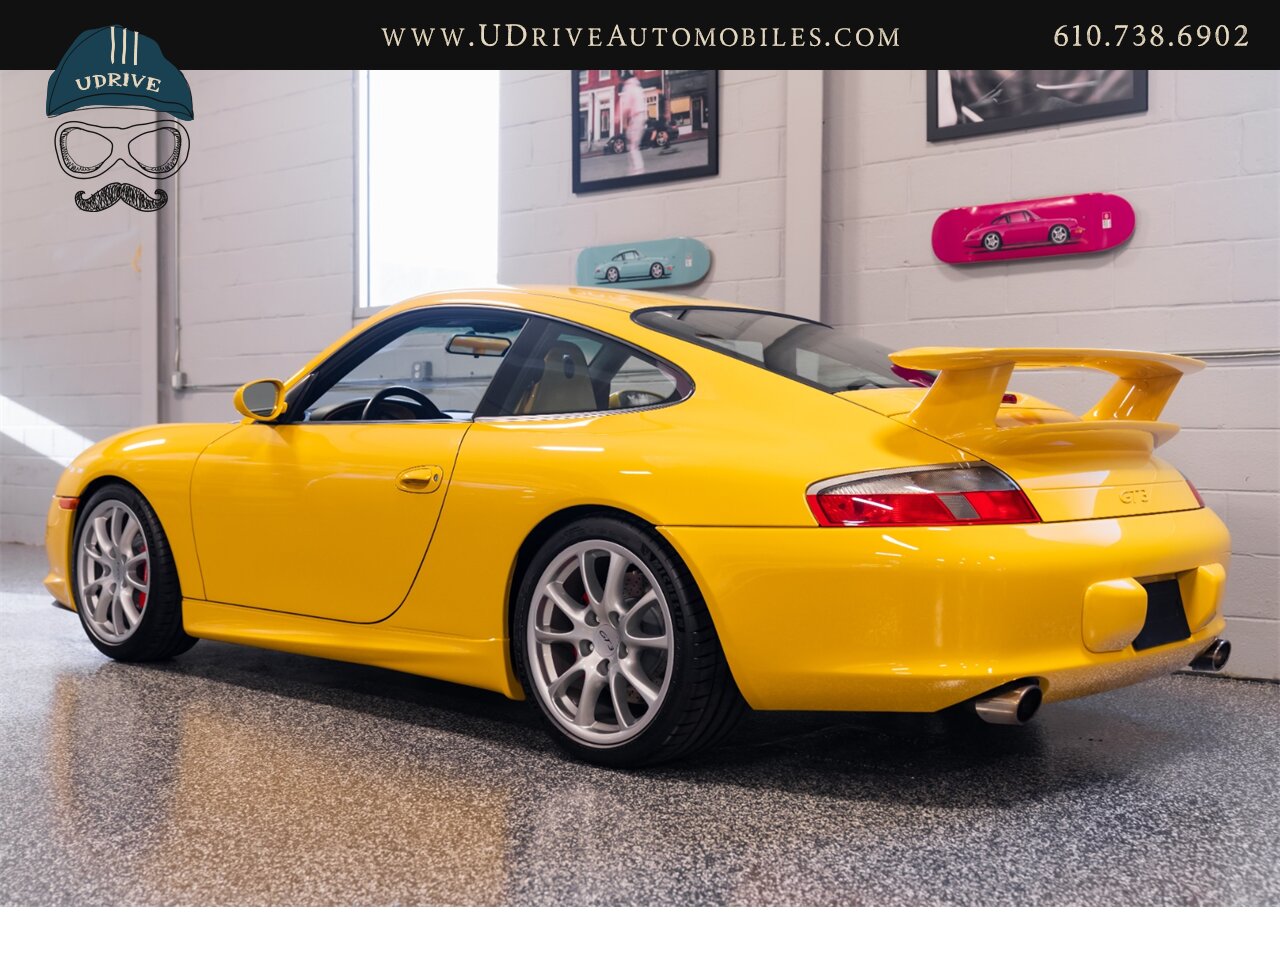 2005 Porsche 911 GT3 996 Speed Yellow Sport Seats Pntd Hardbacks  Pntd Console Deviating Stitch Yellow Accents Throughout - Photo 26 - West Chester, PA 19382